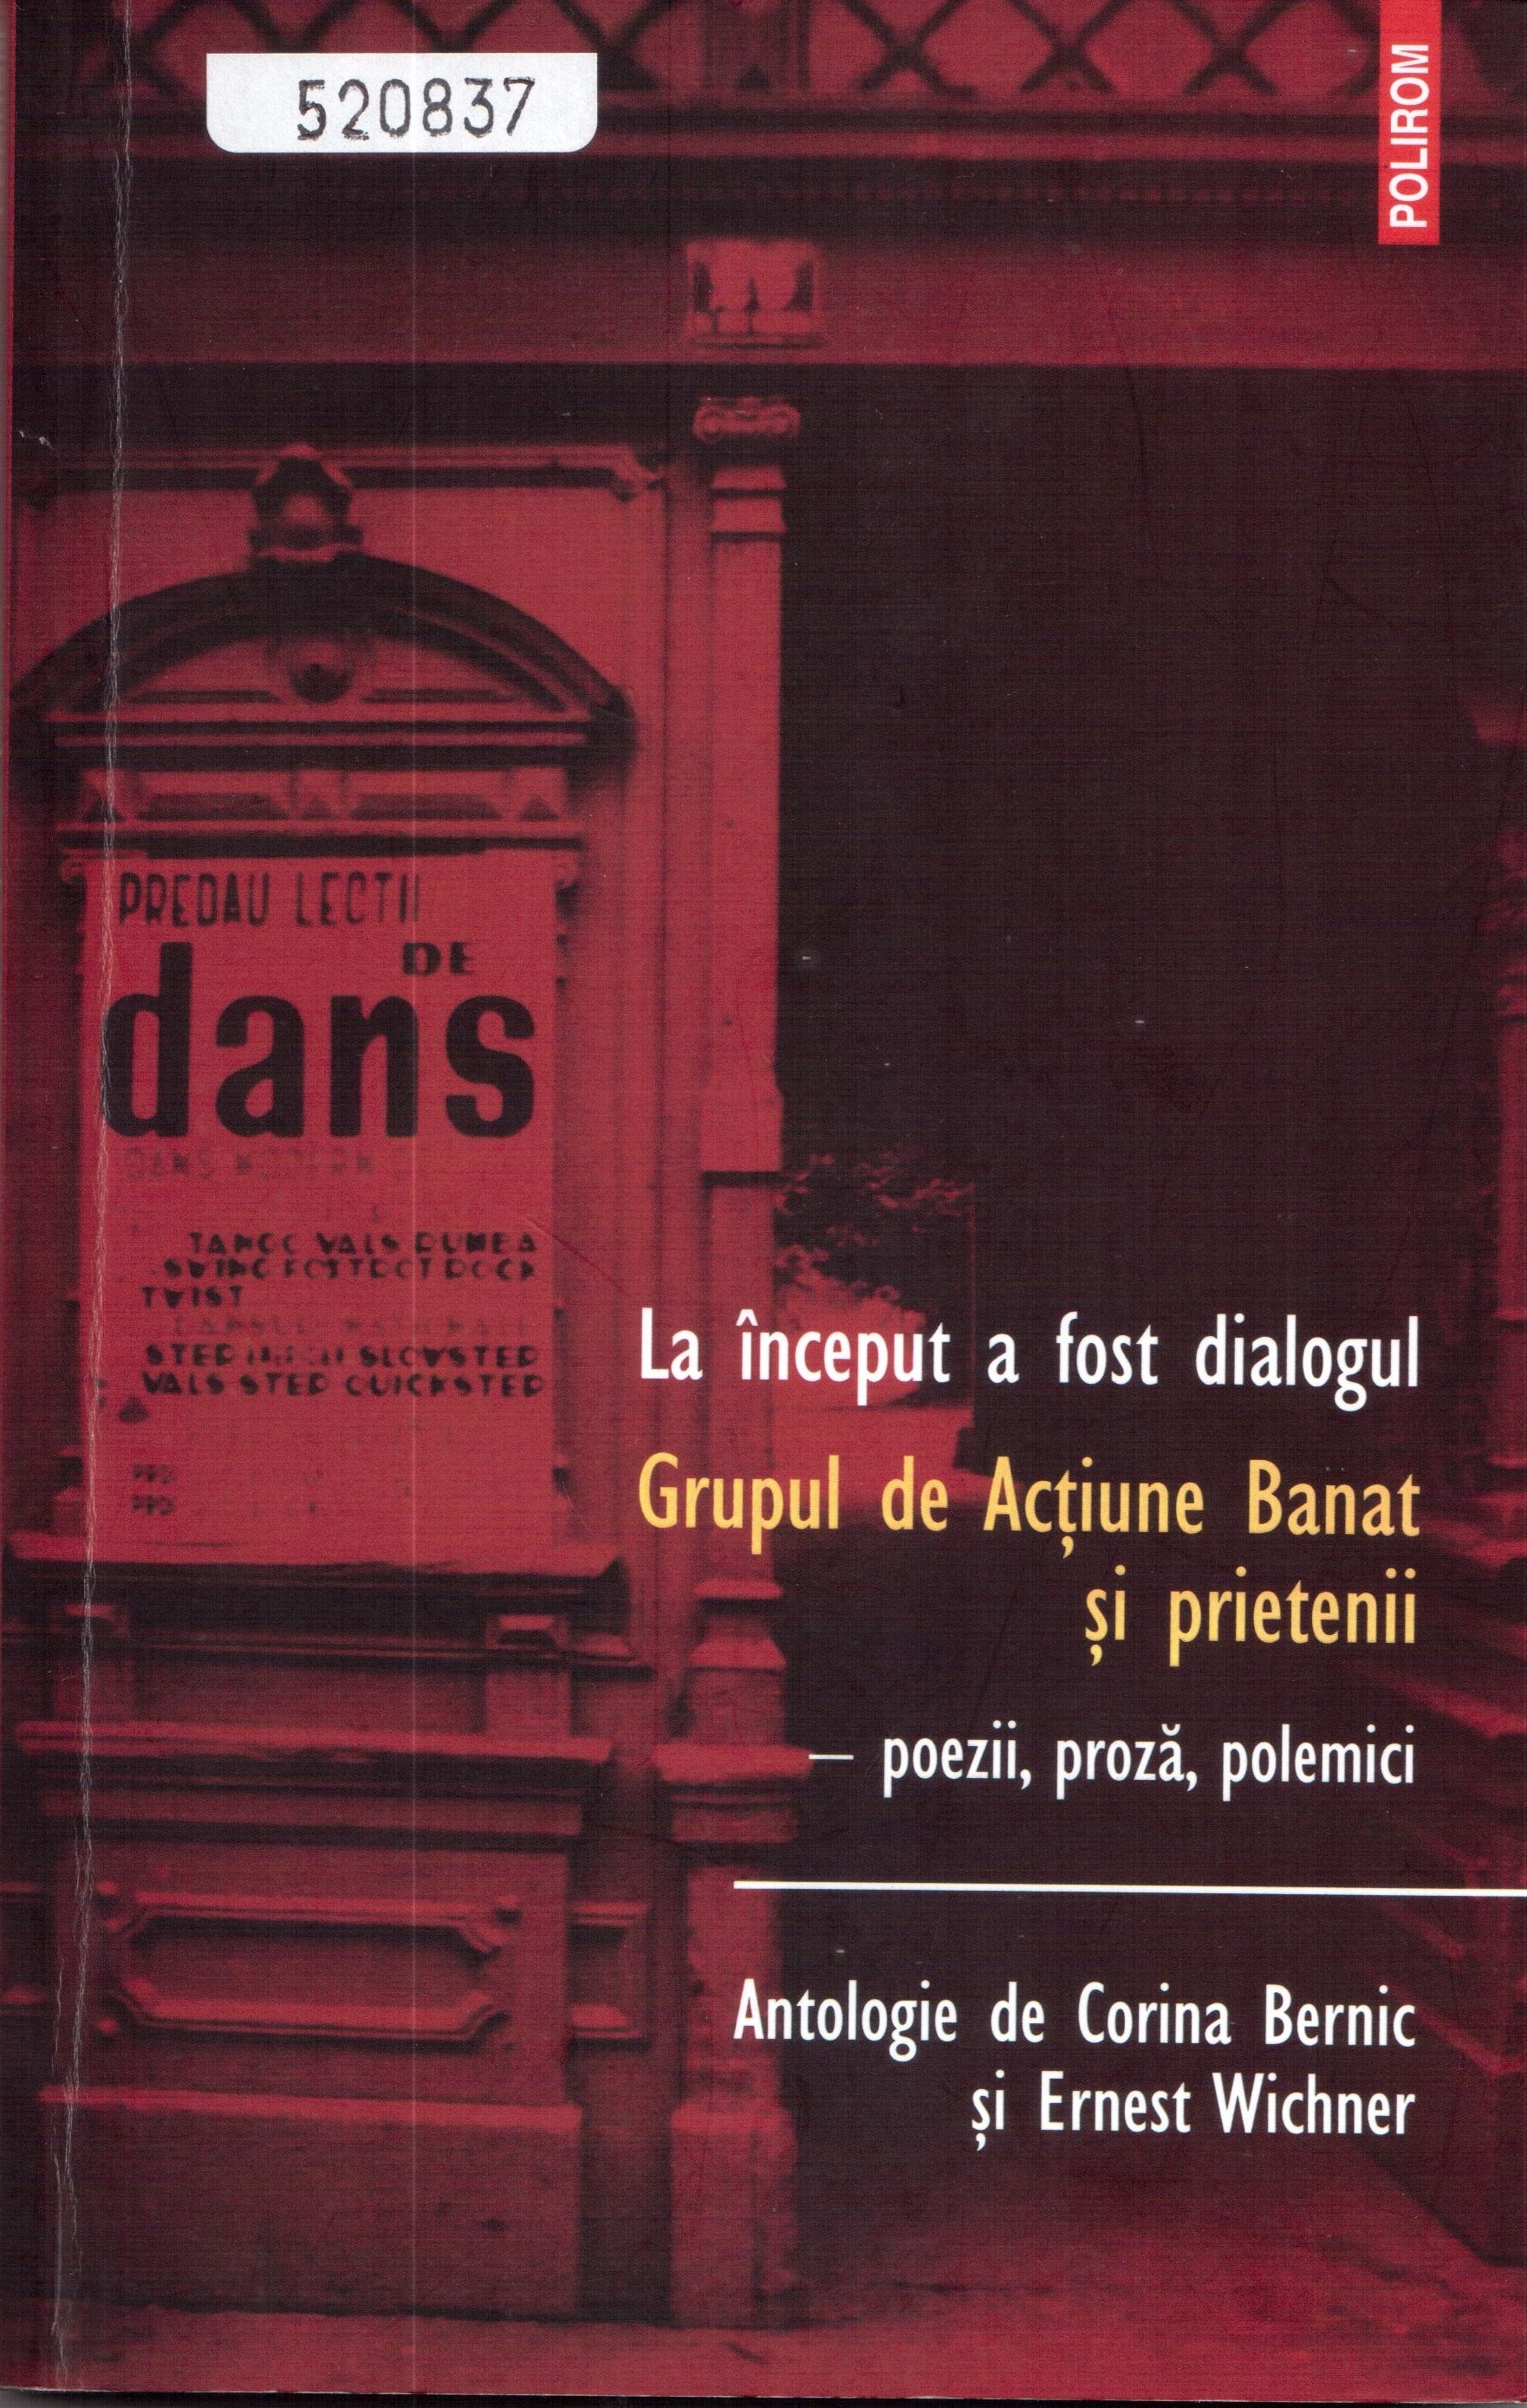 Front cover of the book La început a fost dialogul. Grupul de Acțiune Banat și prietenii: poezii, proza, polemici (At the beginning it was the dialog: Aktionsgruppe Banat and friends, poems, prose, debates), edited by Corina Bernic and Ernest Wichner